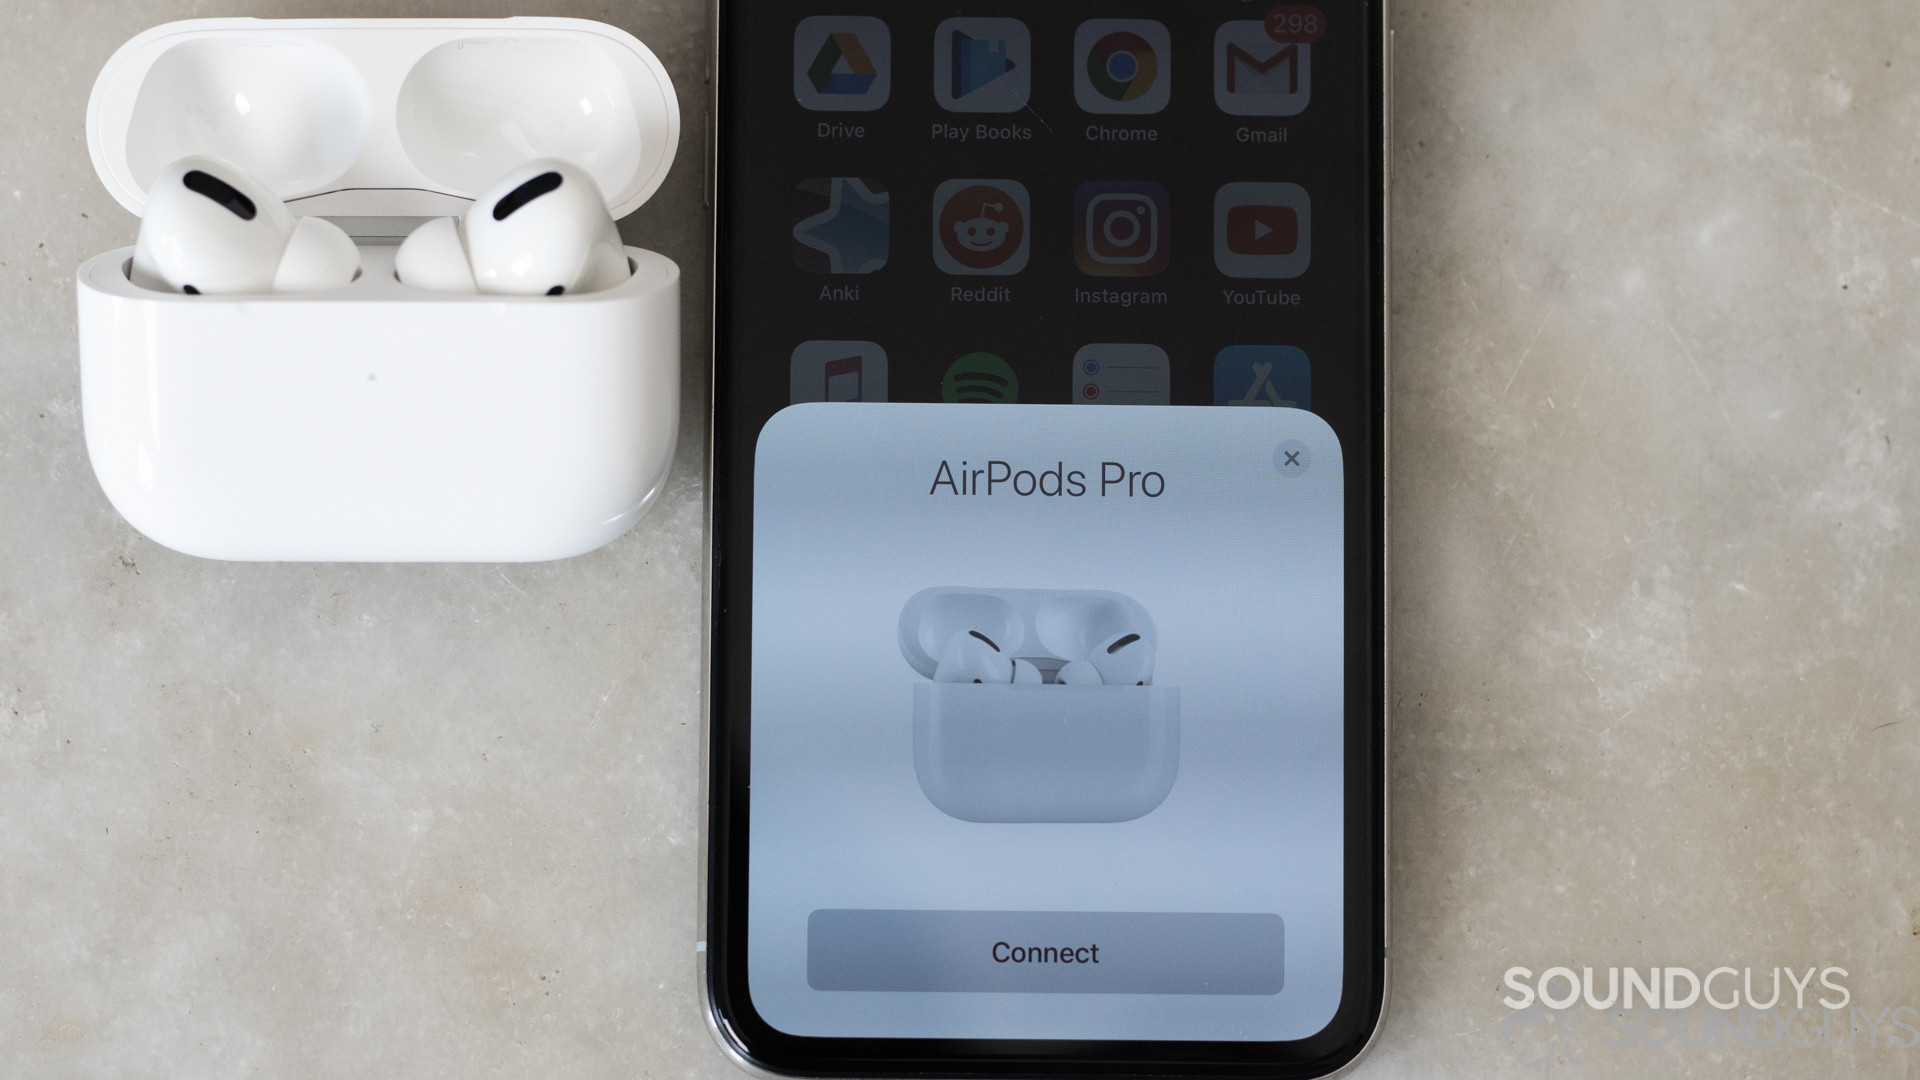 to connect AirPods: iPhone, iPad, Mac, PC, and more - SoundGuys